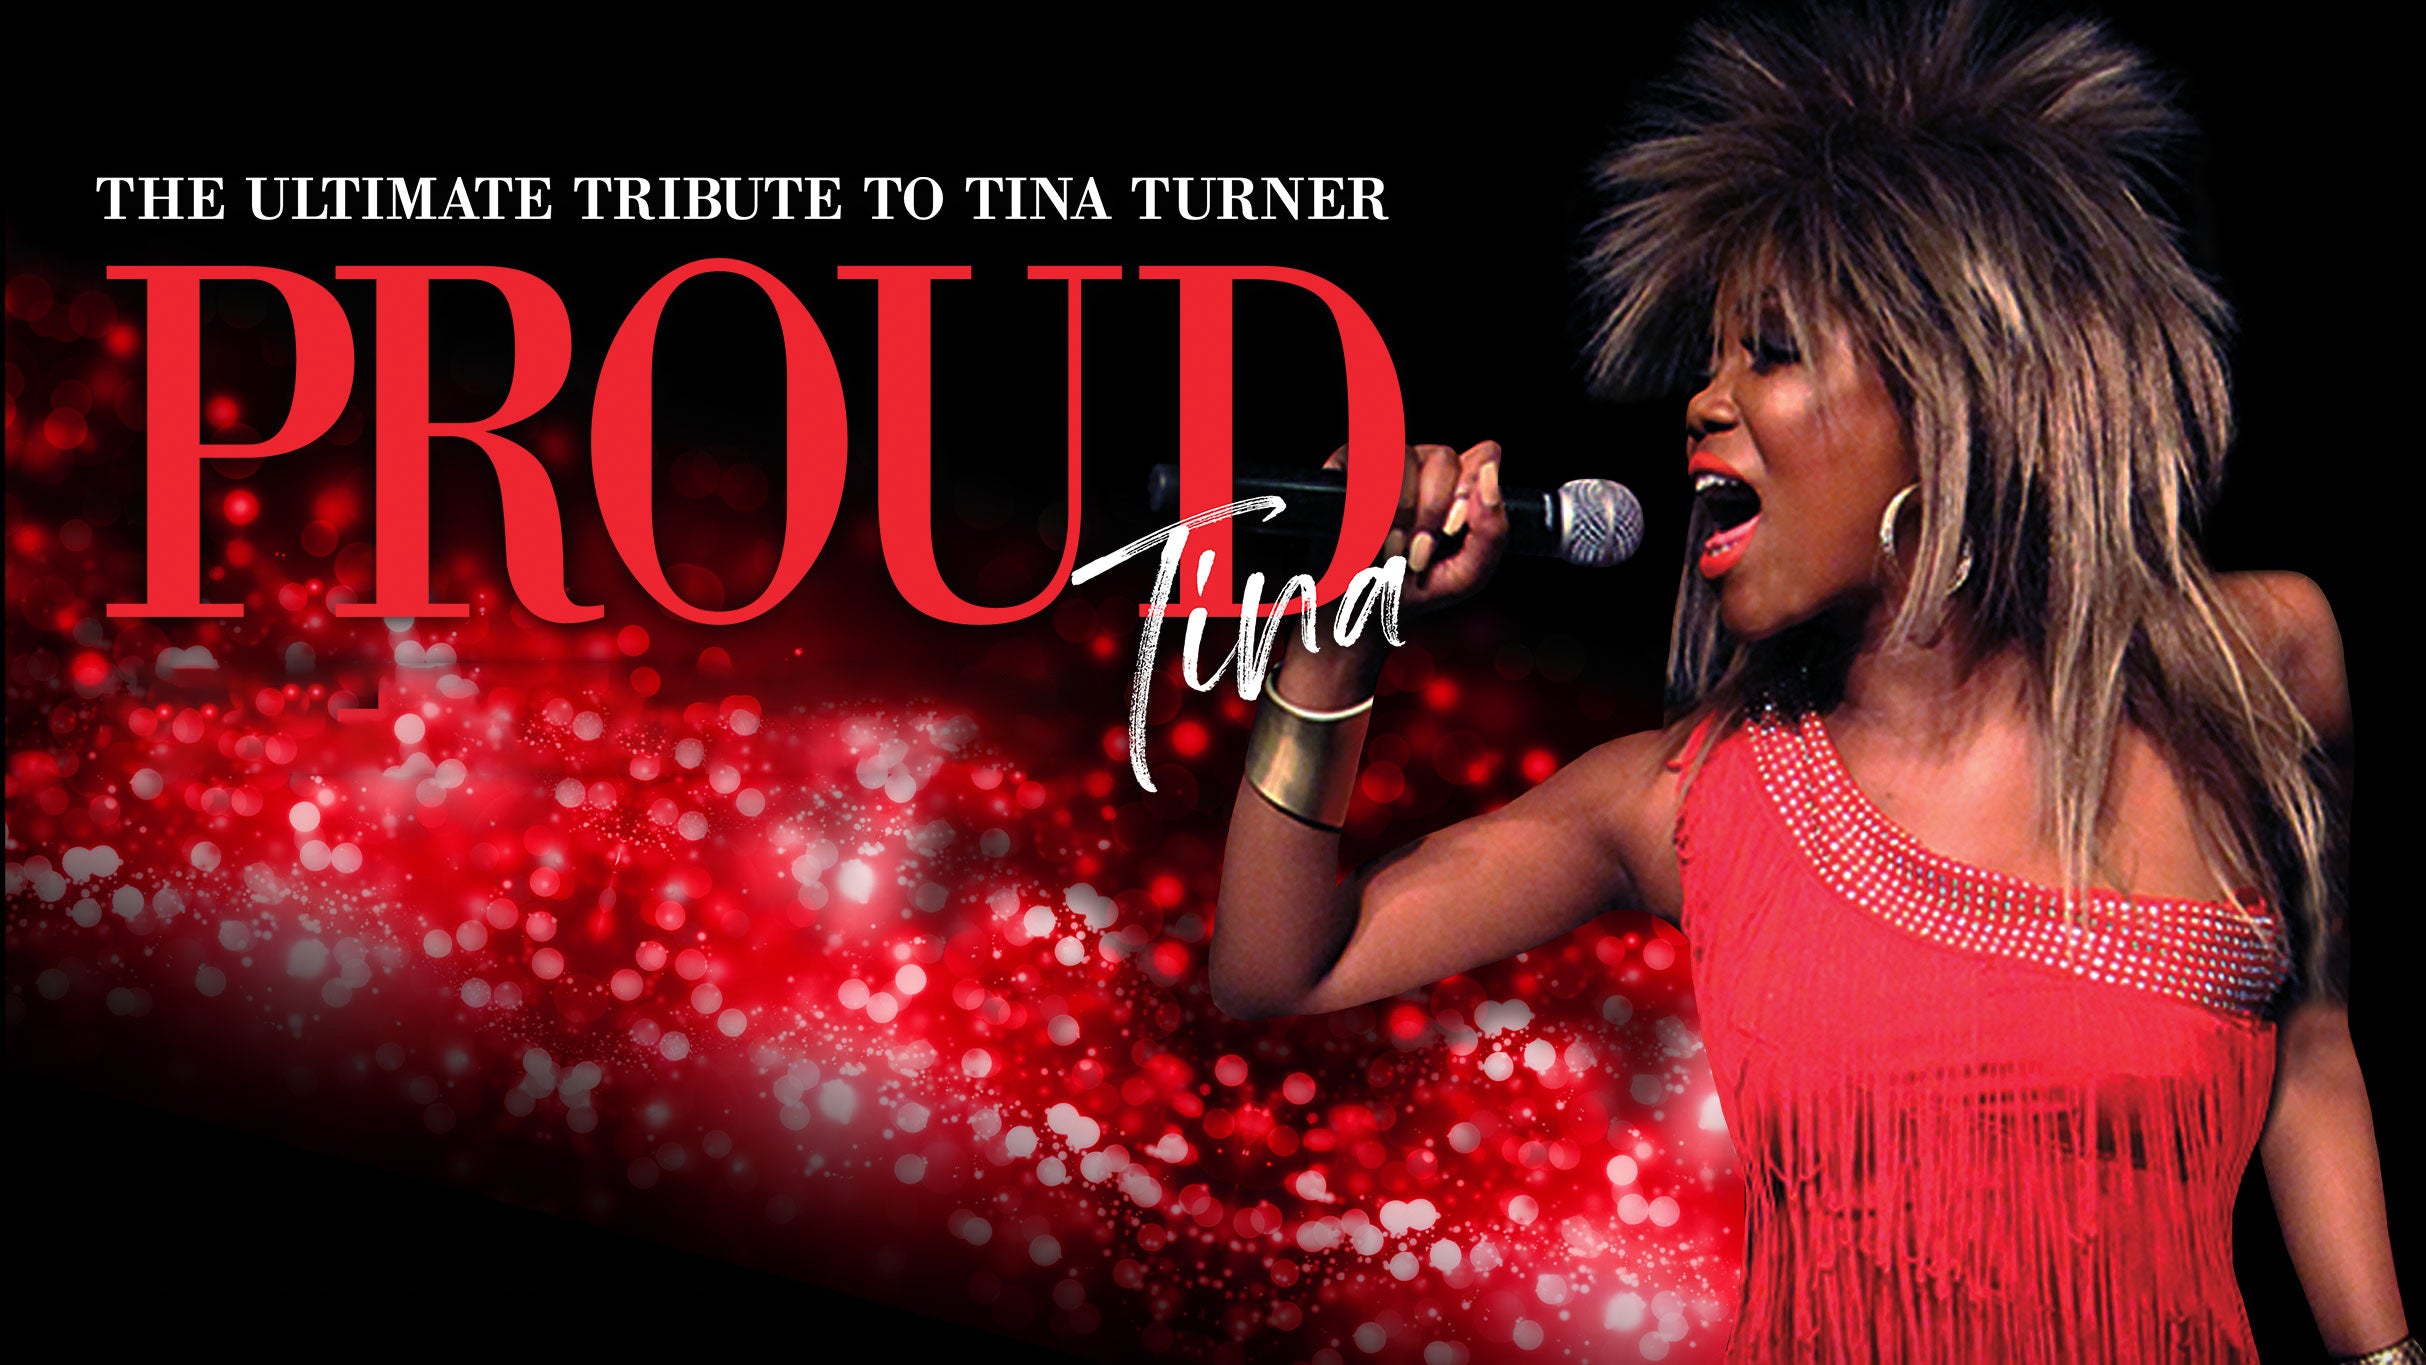 PROUD Tina: The Ultimate Tribute to Tina Turner in Moline promo photo for Vibrant Arena presale offer code